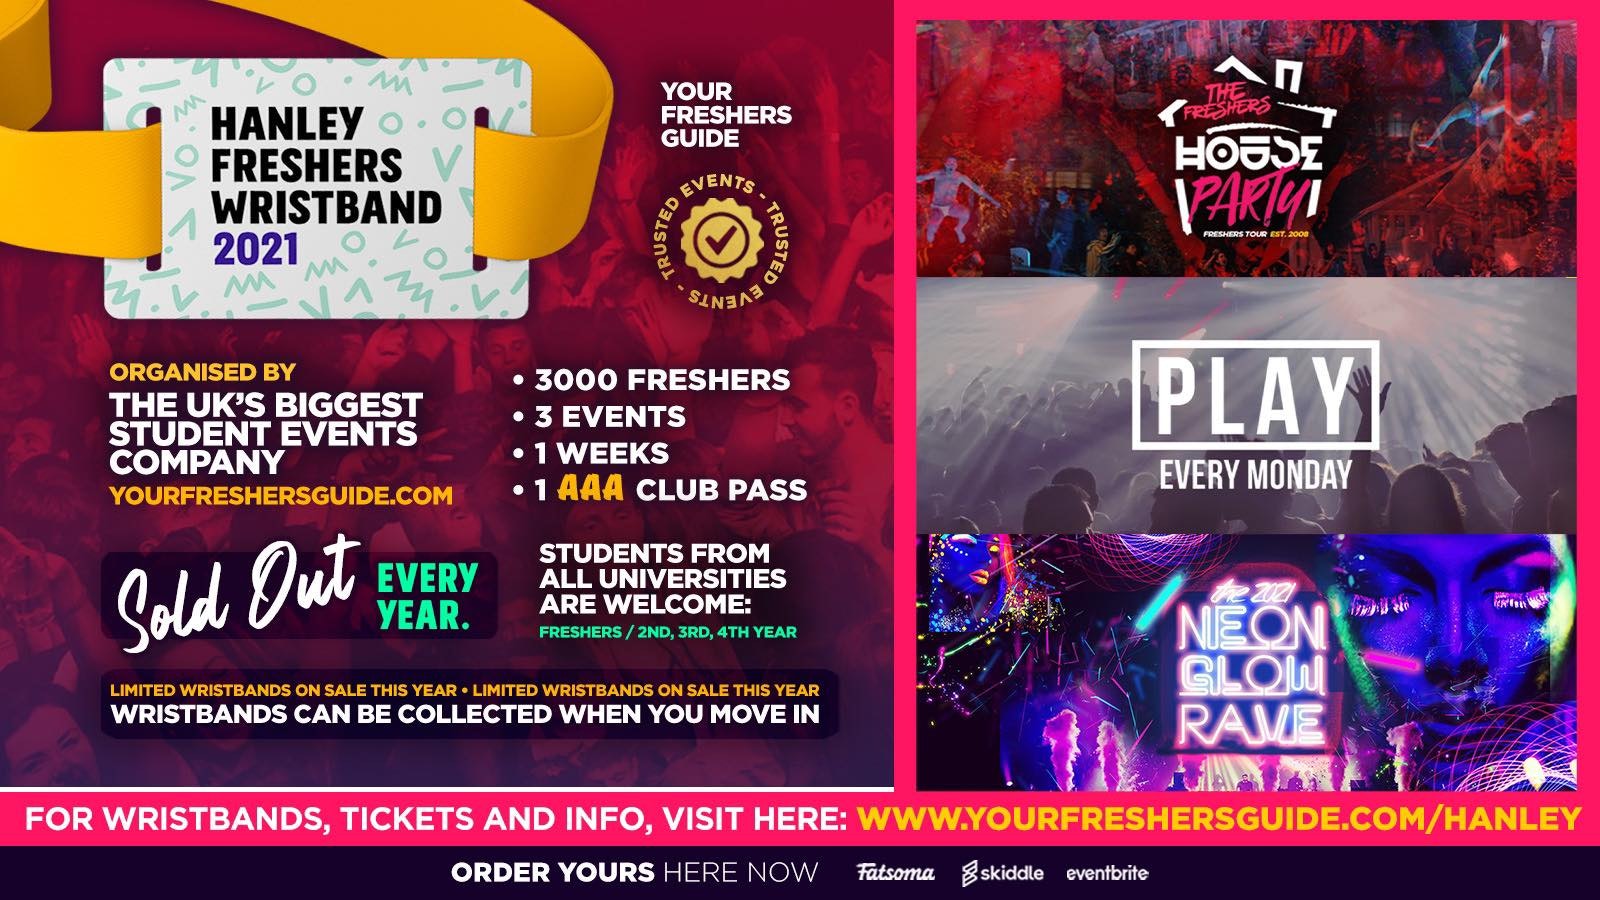 Hanley Freshers Wristband 2021 – The Official Freshers Pass | Includes the biggest events in Hanley